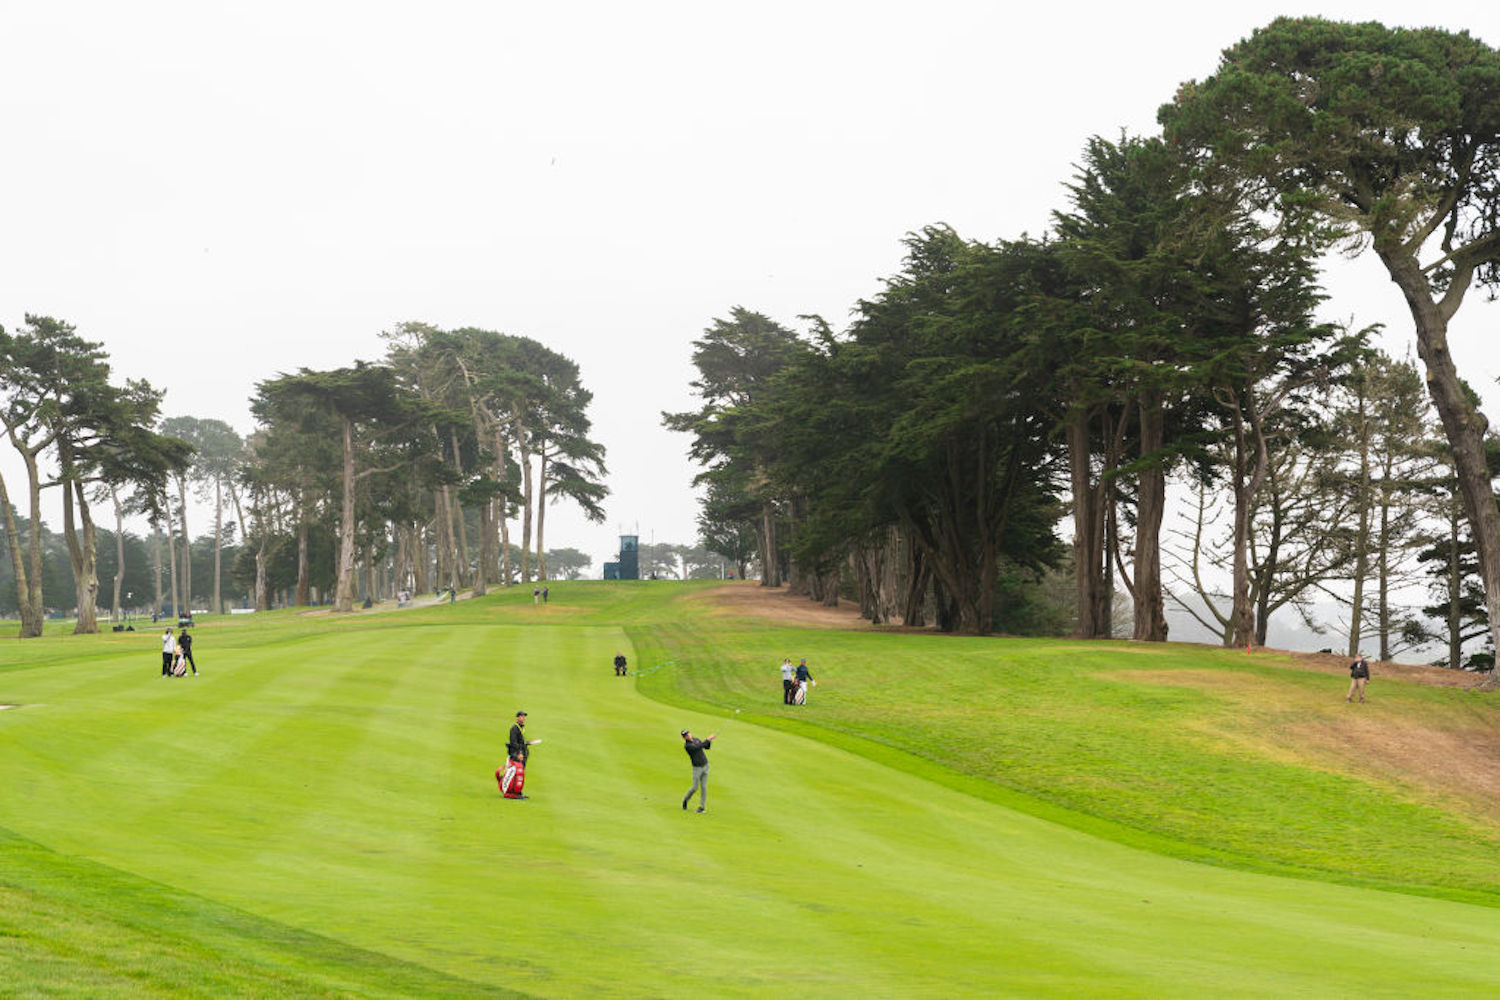 TPC Harding Park is a worthy venue for the 2020 PGA Championship, but the course was once used as a parking lot for another nearby track.